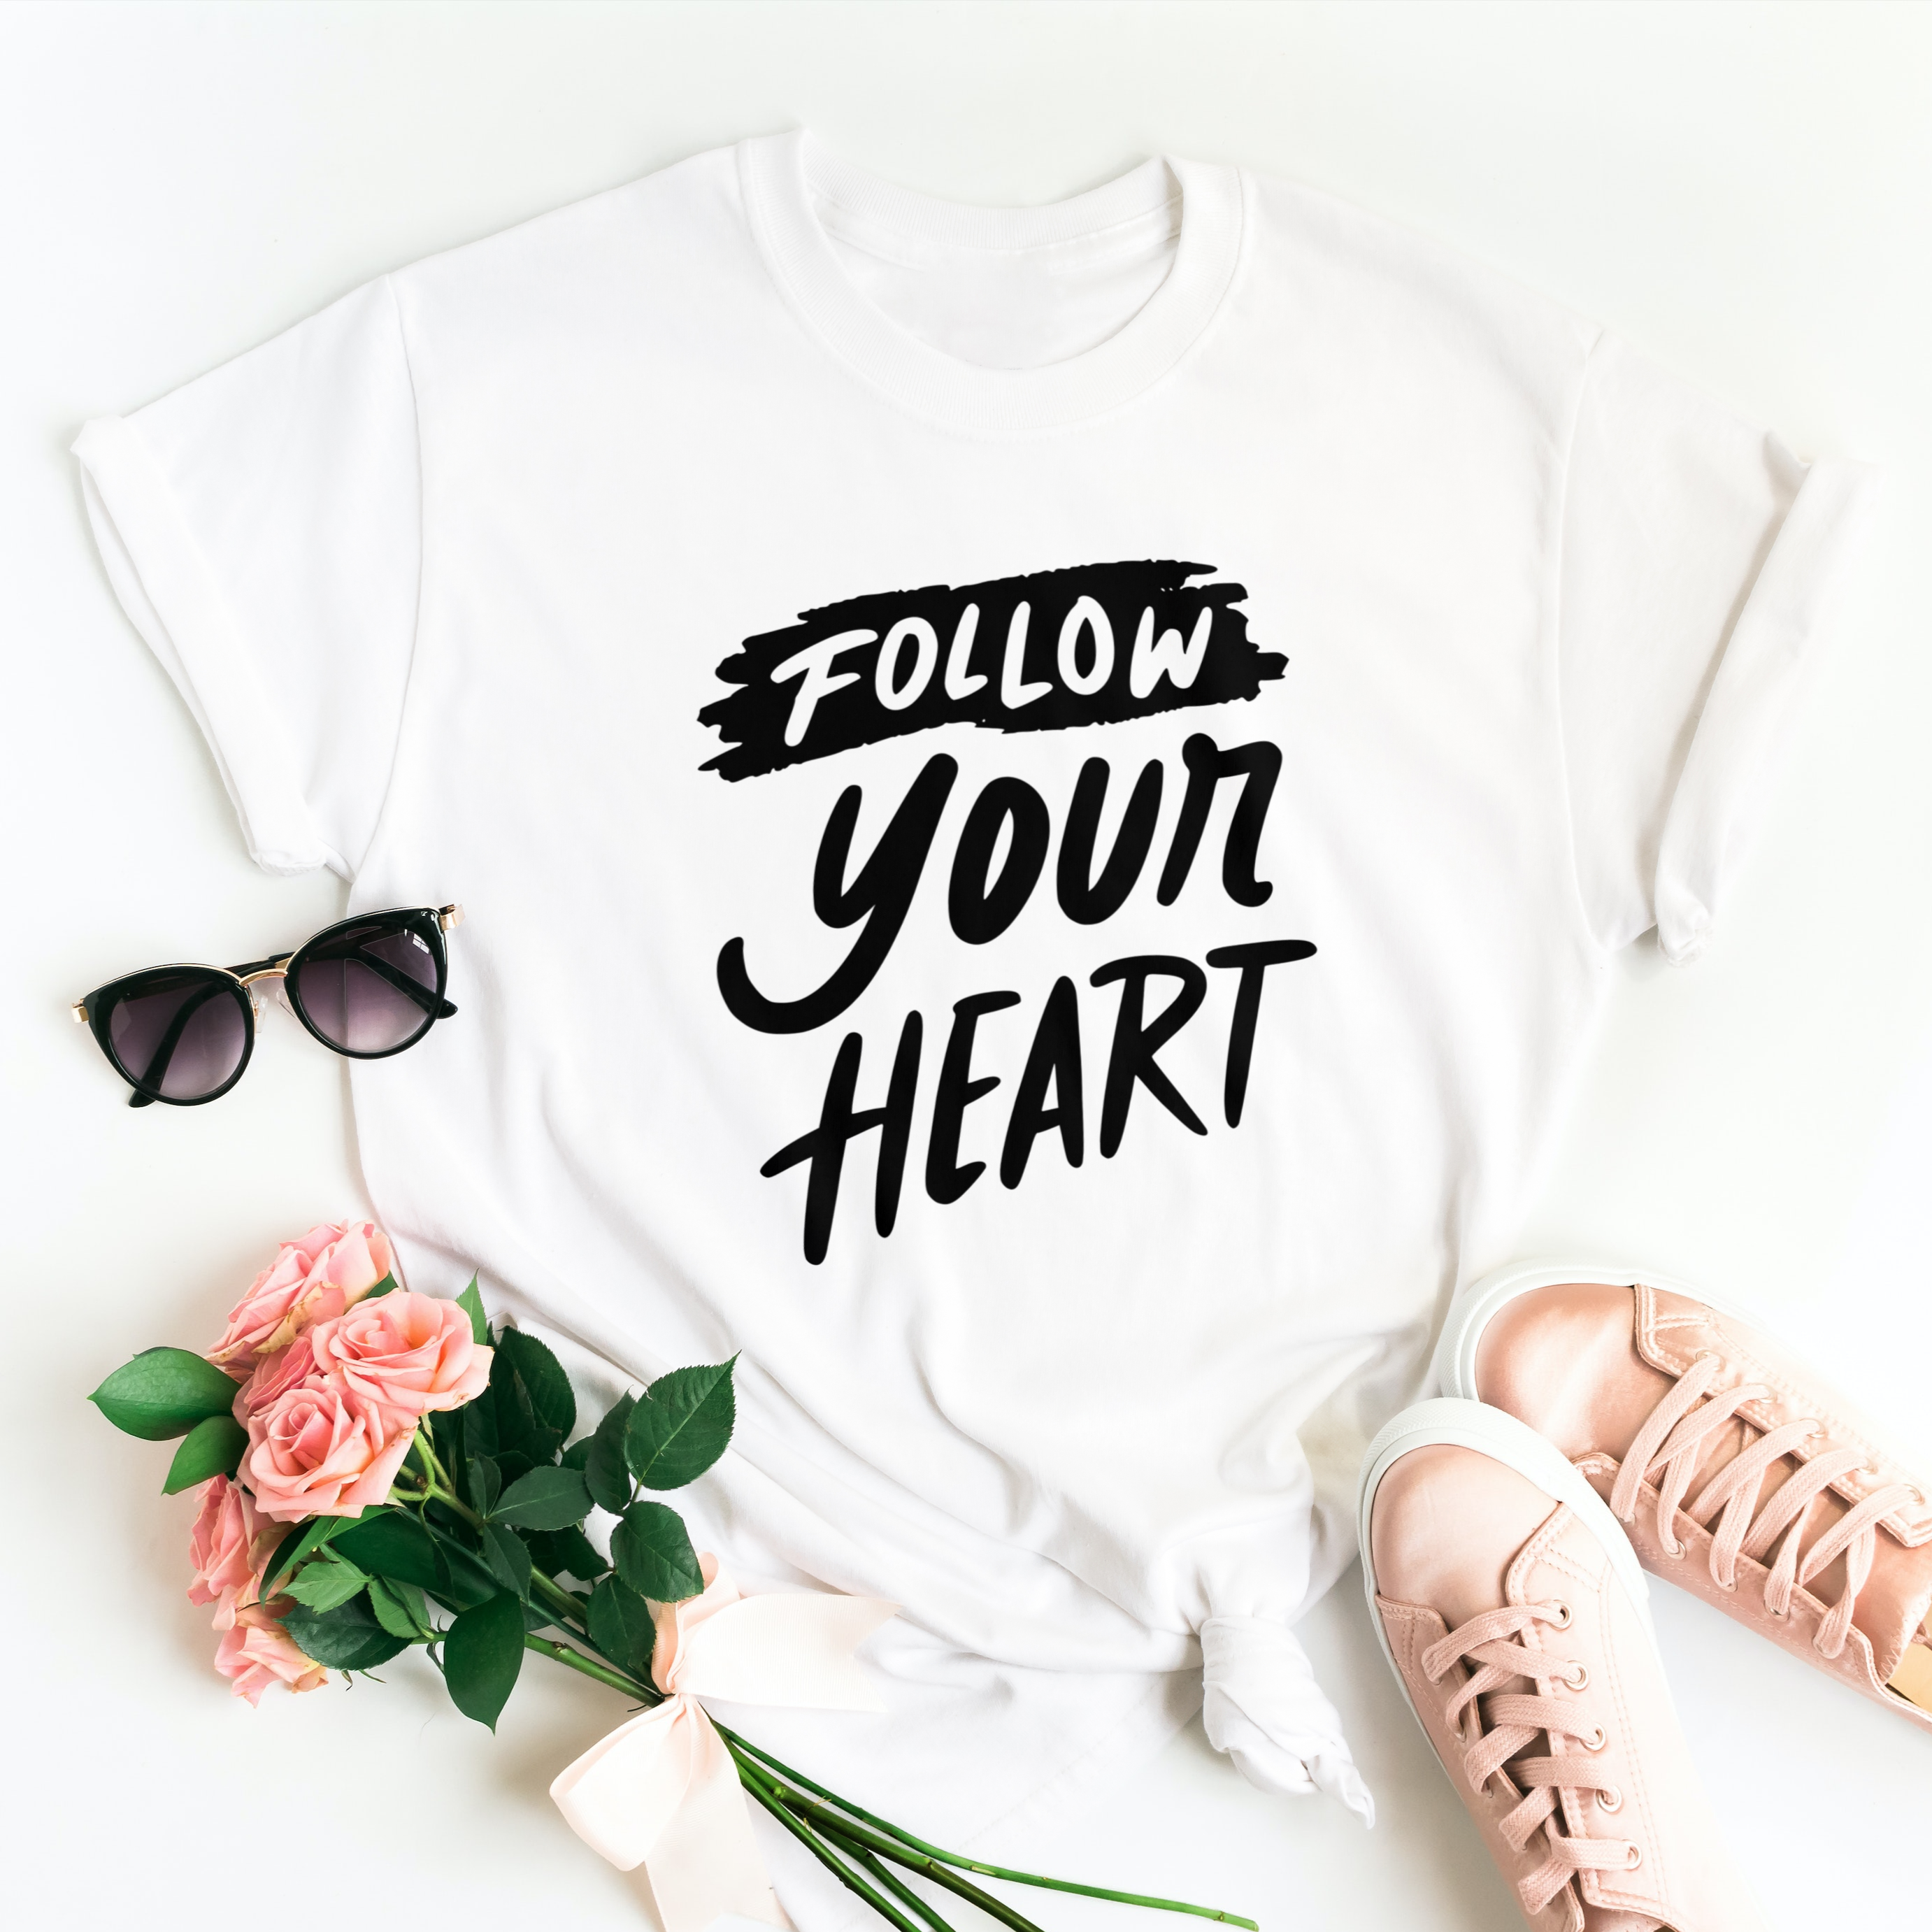 Story of Awakening Lifestyle Community Spirituality Relationships Love Light Meditation Oneness Earth Balance Healing Shop Store Charity Tree Nature Read Write T shirt Tops Tees Clothing Women Horoscope Organic Cotton Follow Your Heart Quote